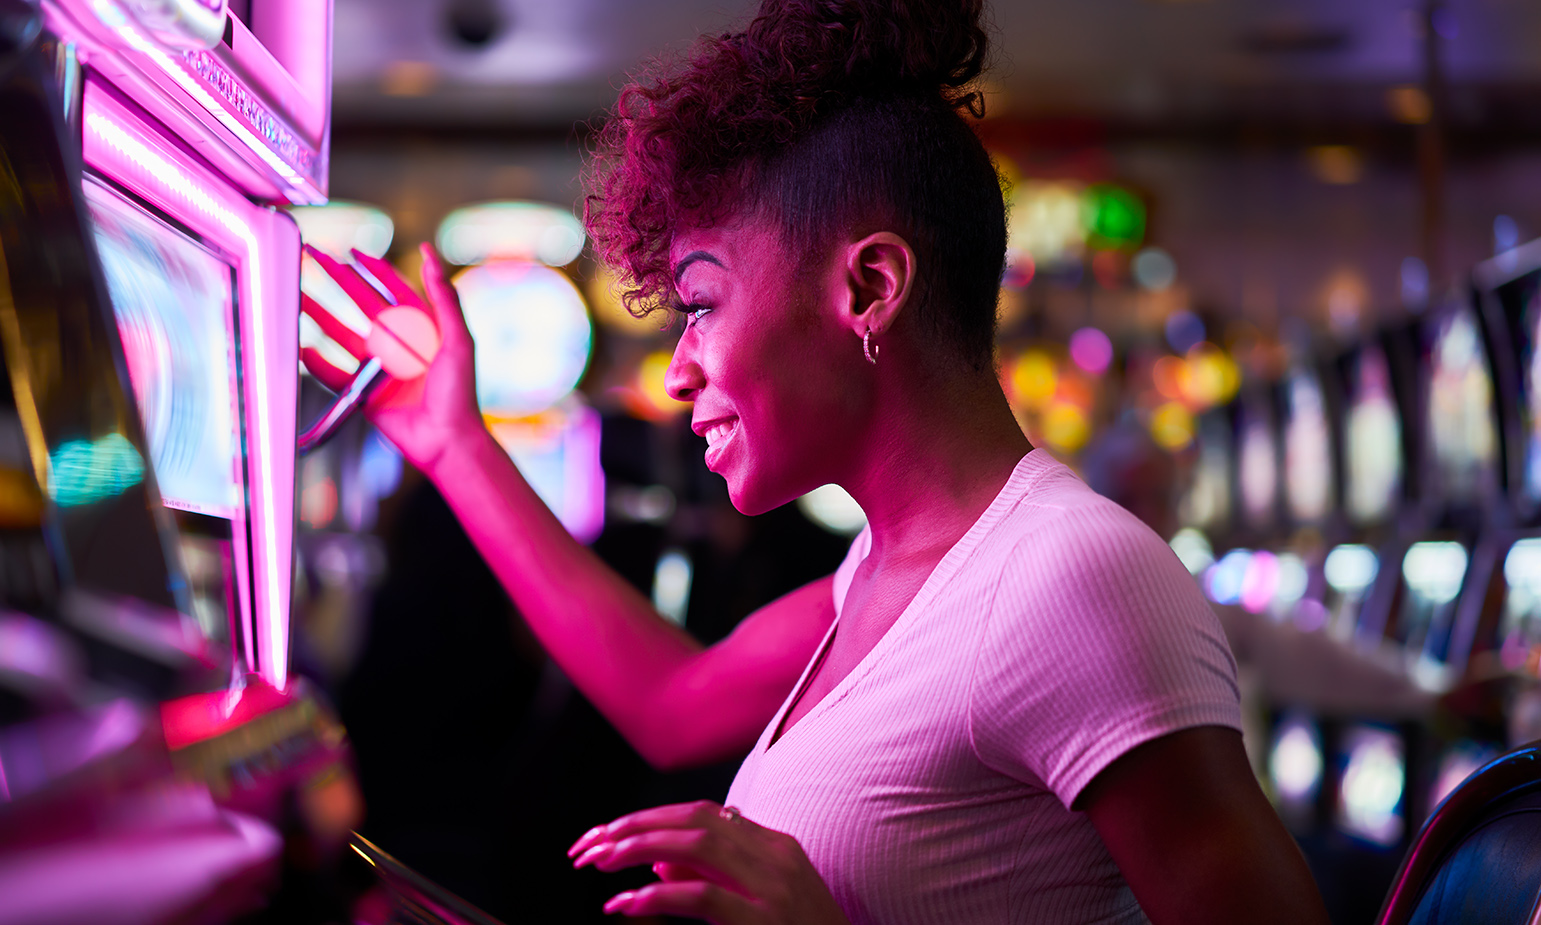 Profile view of woman smiling as she stares at slot machine, her hand on the lever, illuminated by the machine's pink light